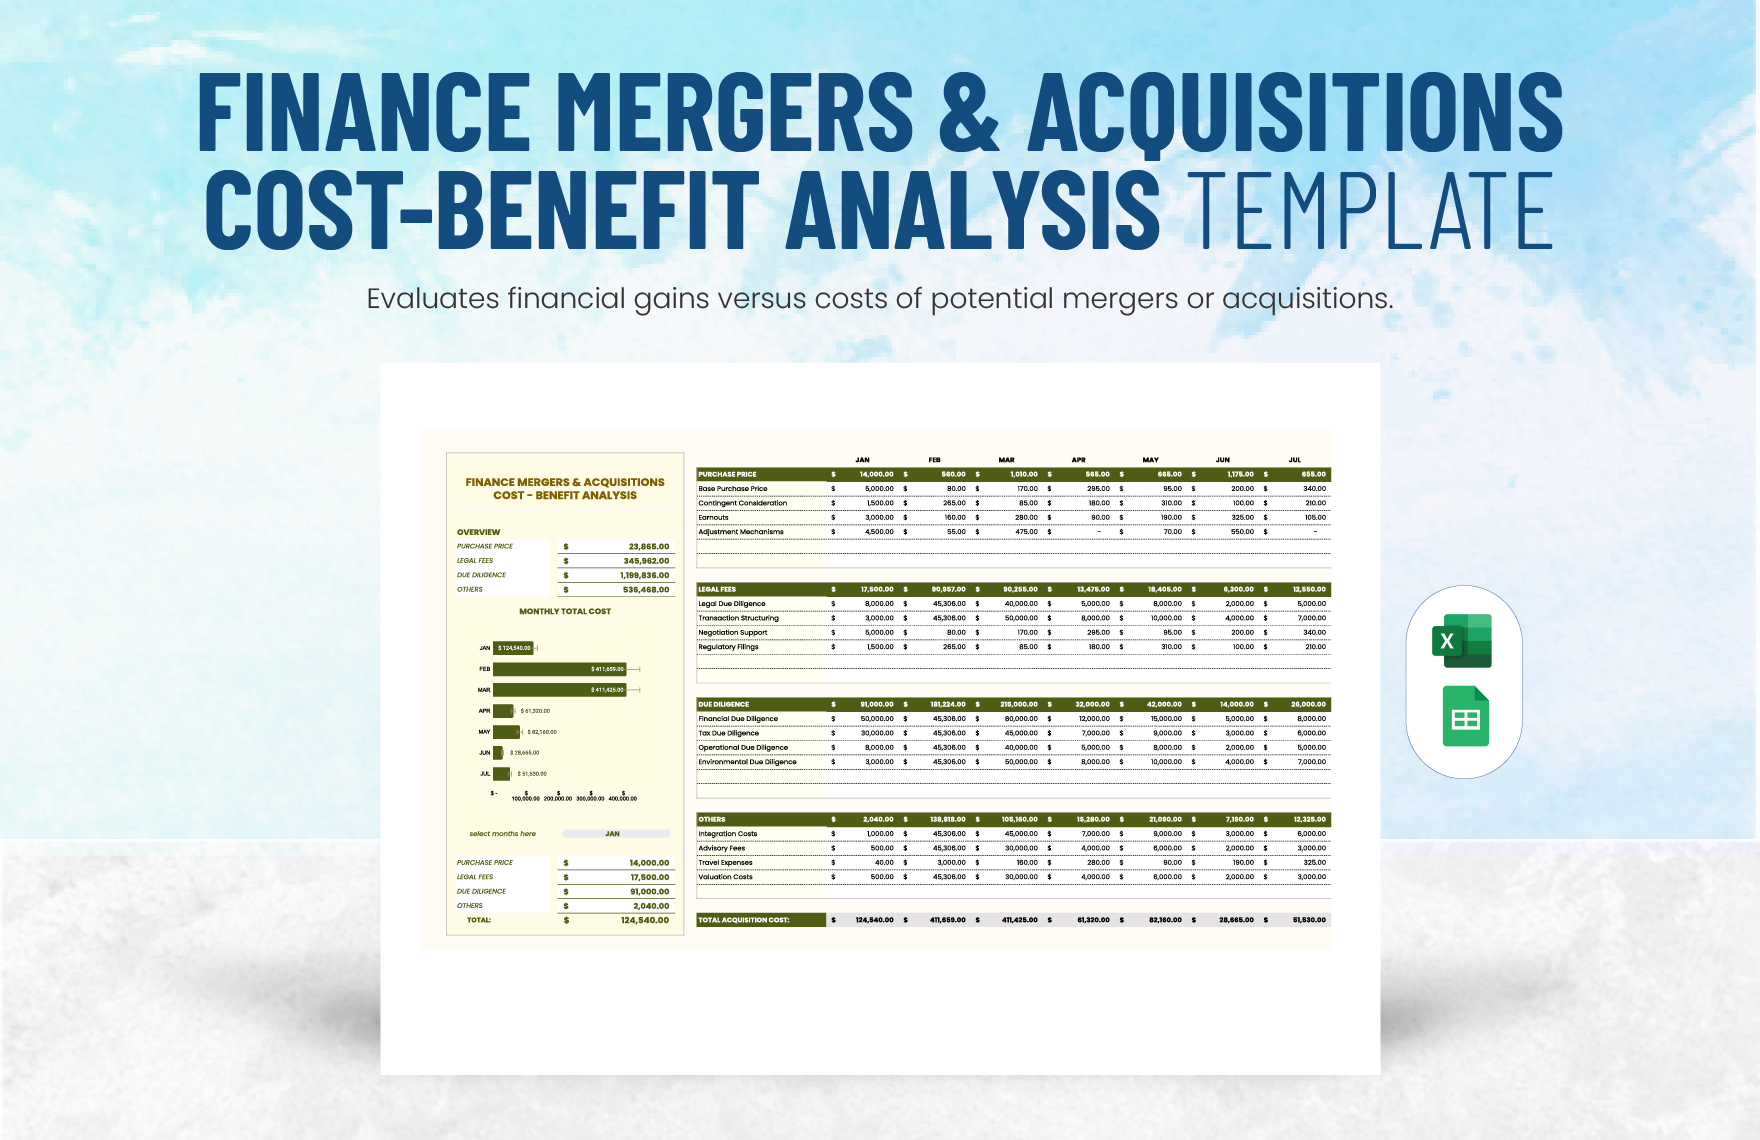 Finance Mergers & Acquisitions Cost-Benefit Analysis Template